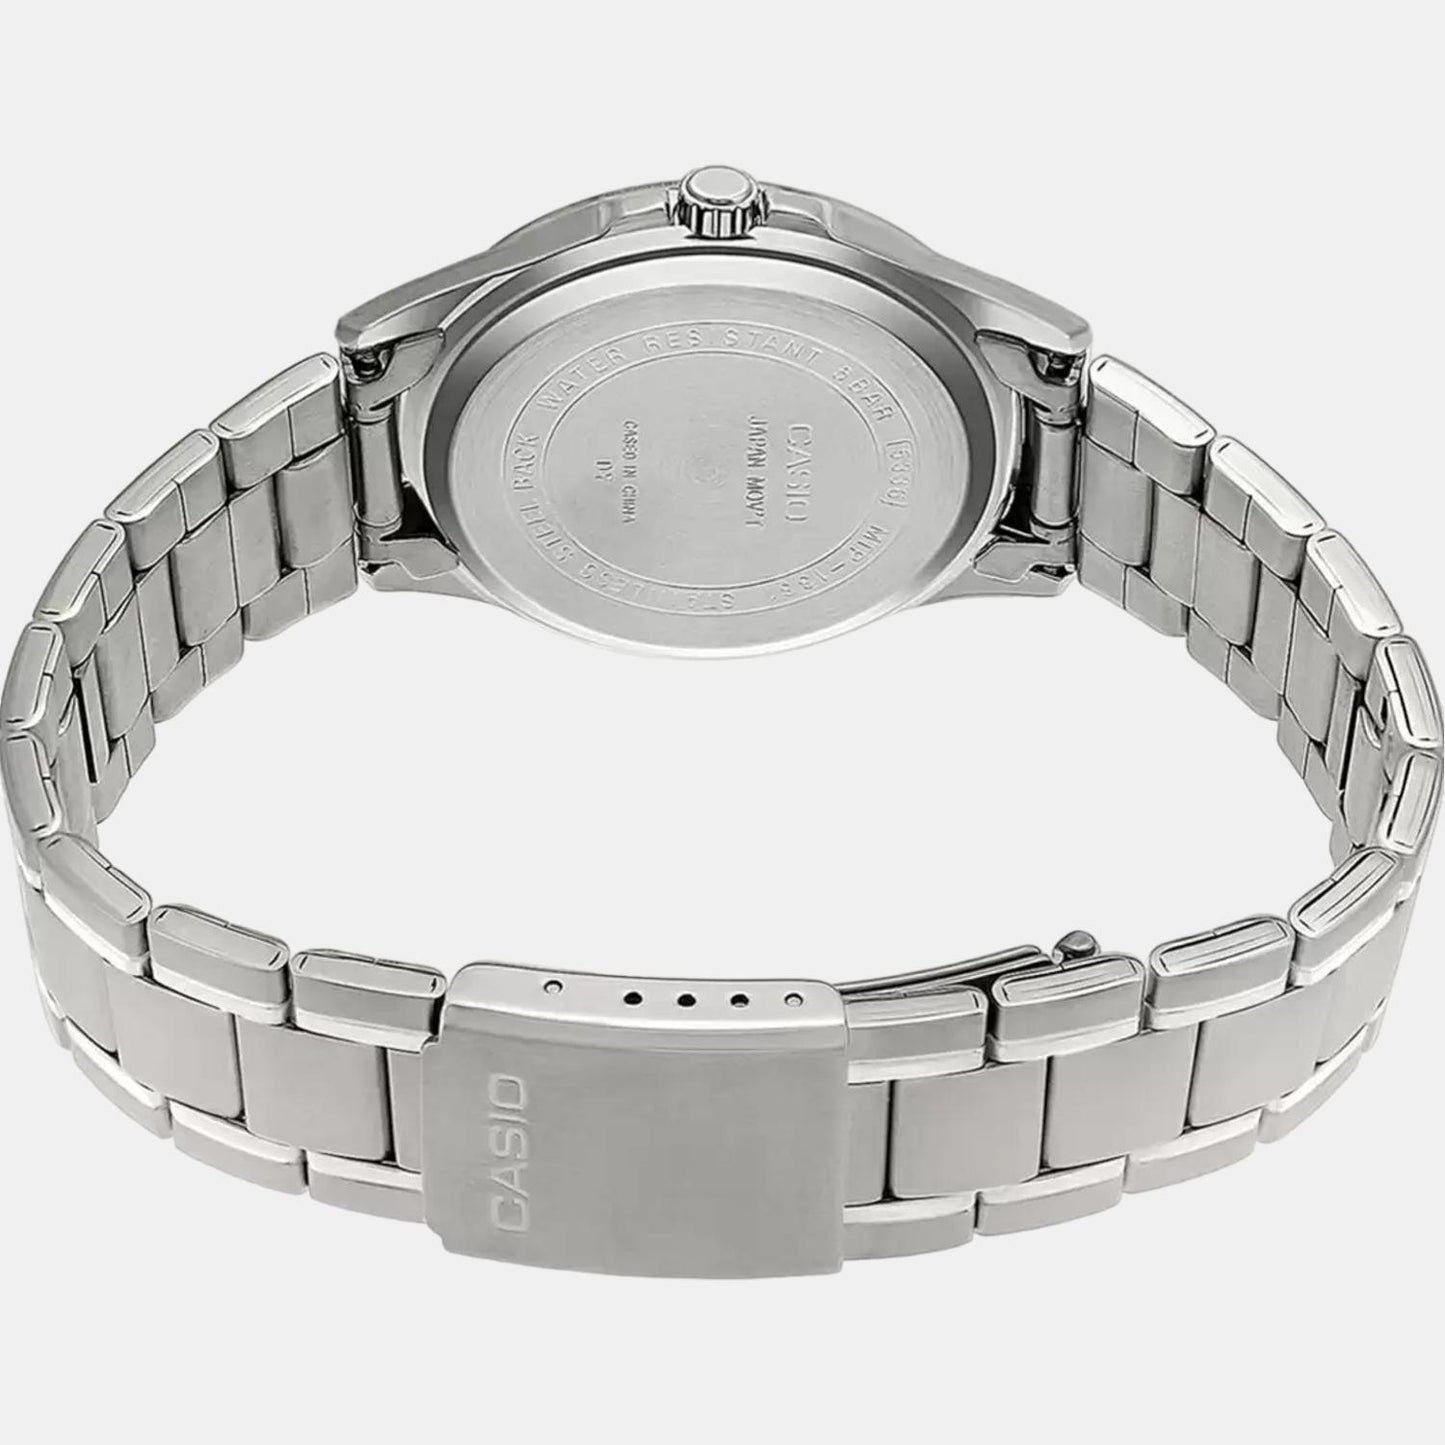 Enticer Male Analog Stainless Steel Watch A841